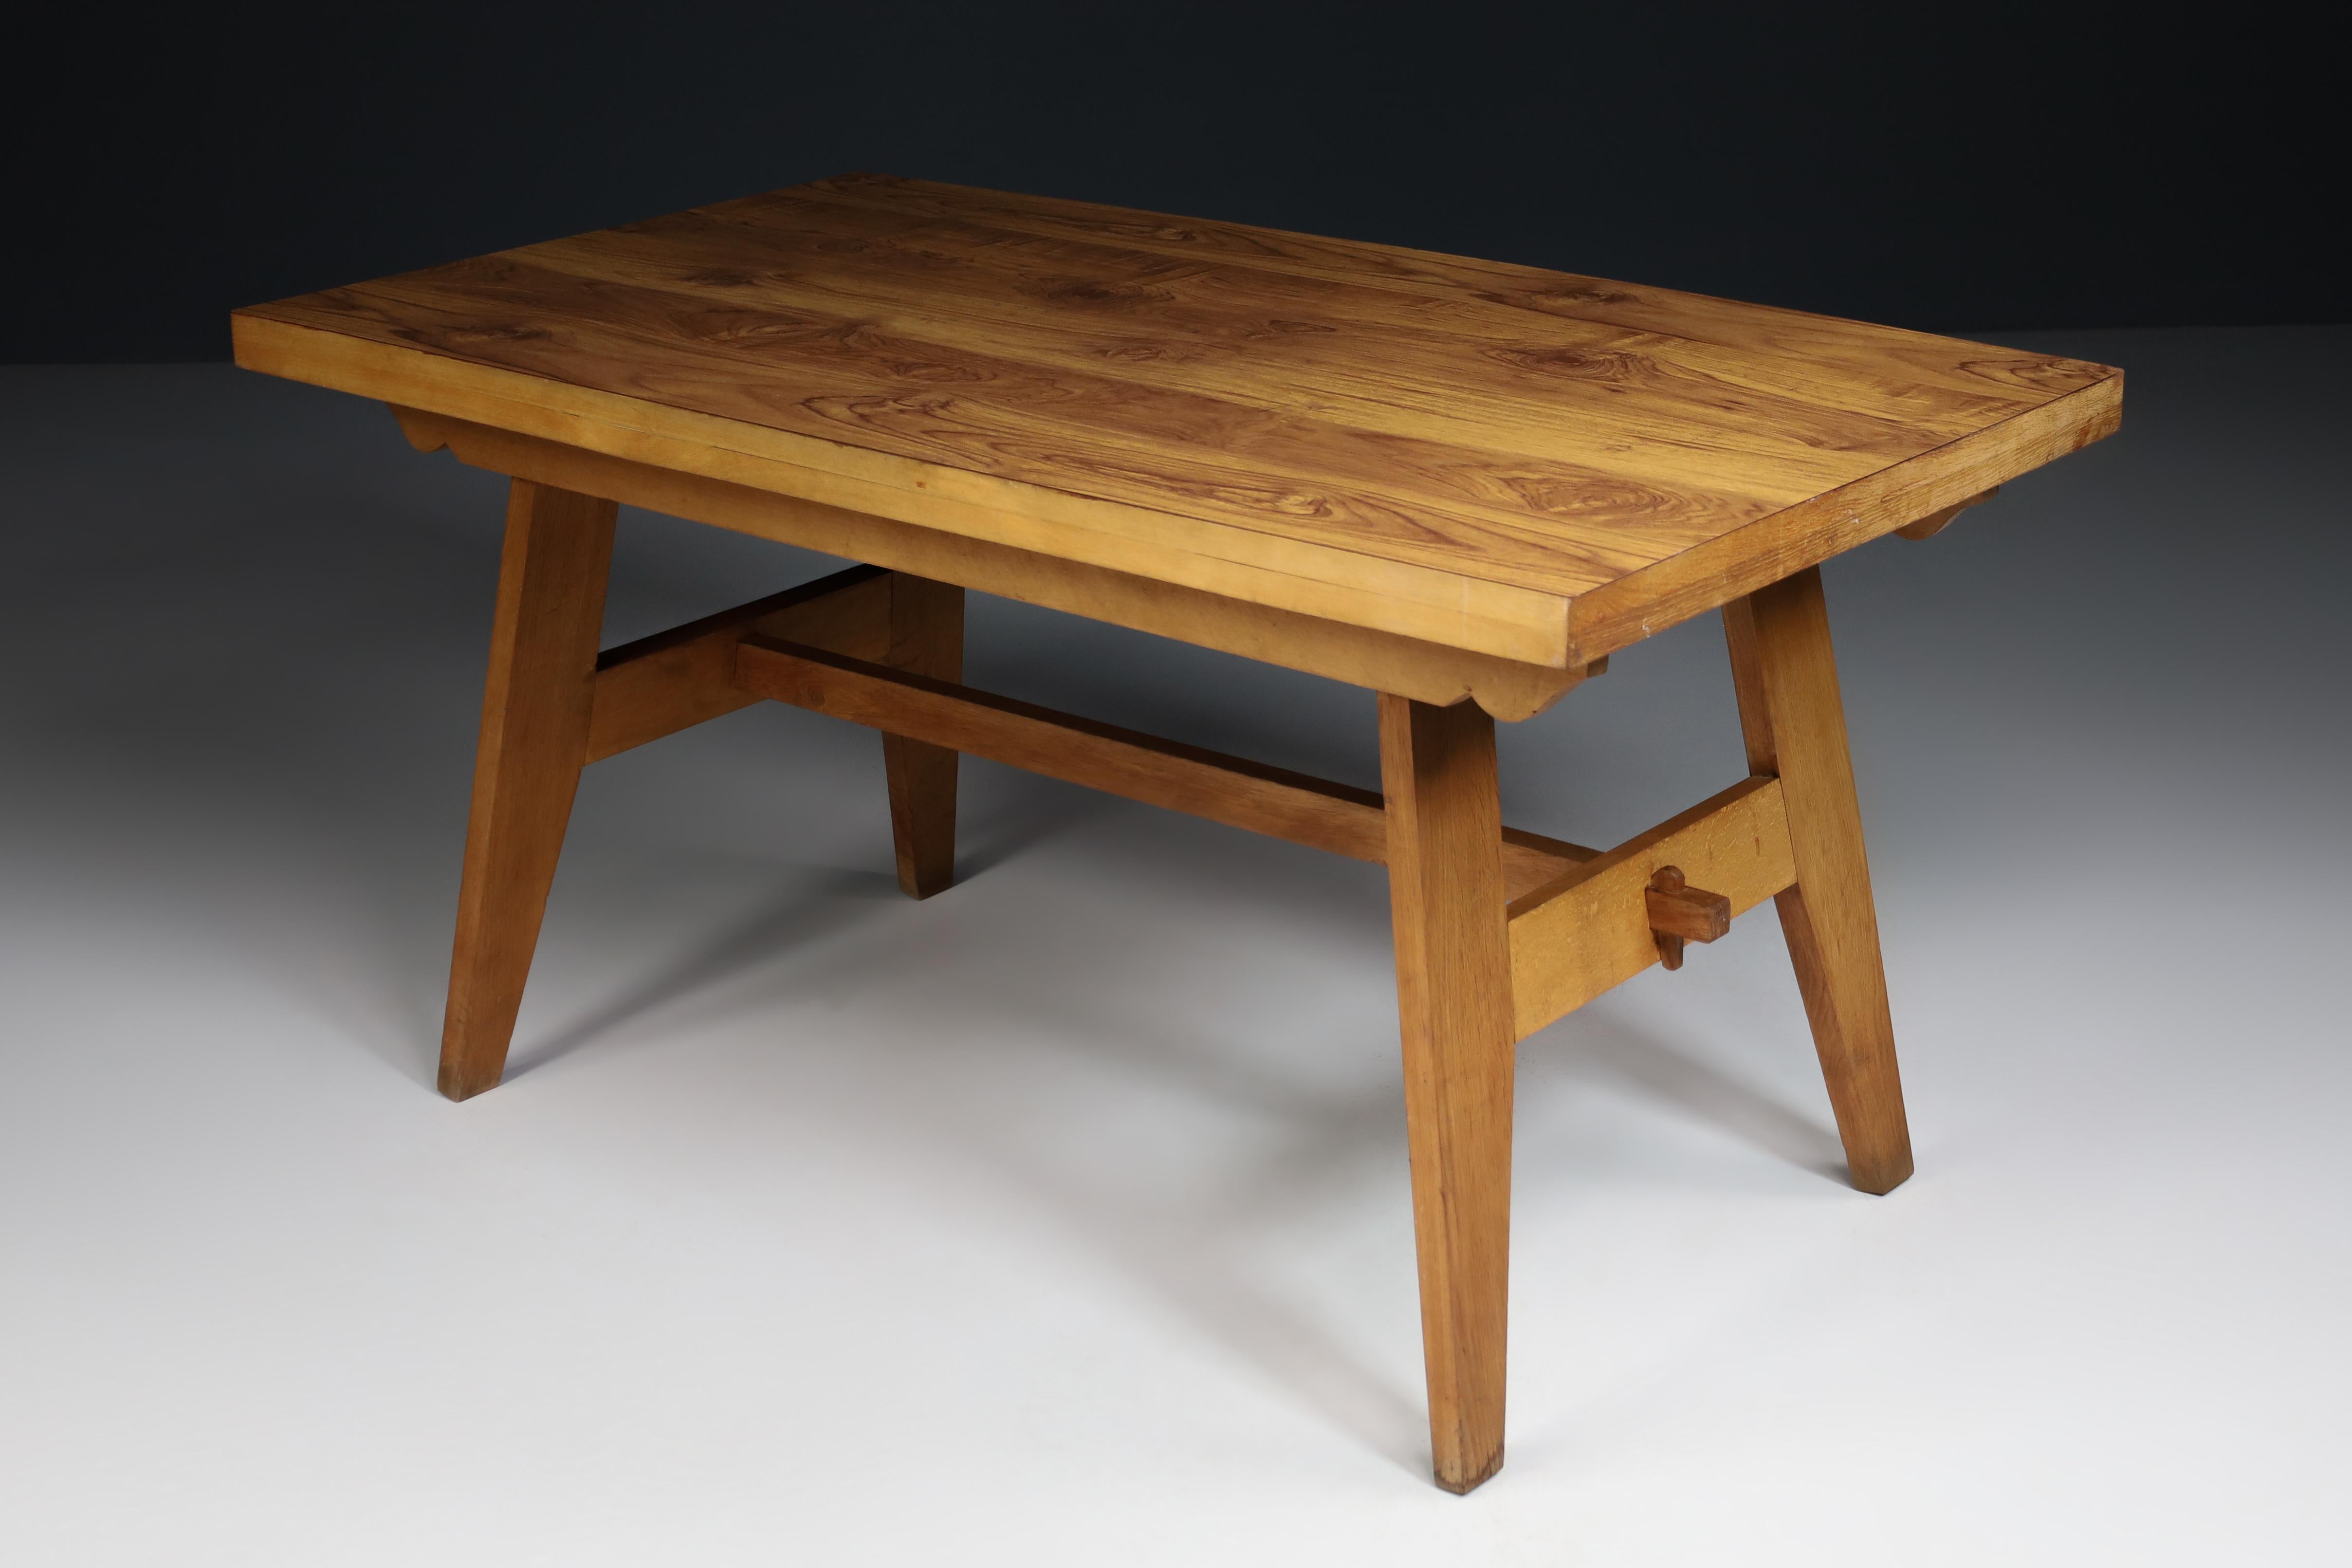 René Gabriel blond oak reconstruction table, France 1945. 

René Gabriel put himself at the service of French Reconstruction from the 1940s; he designed furniture intended to be produced in large series, using local wood species such as oak,